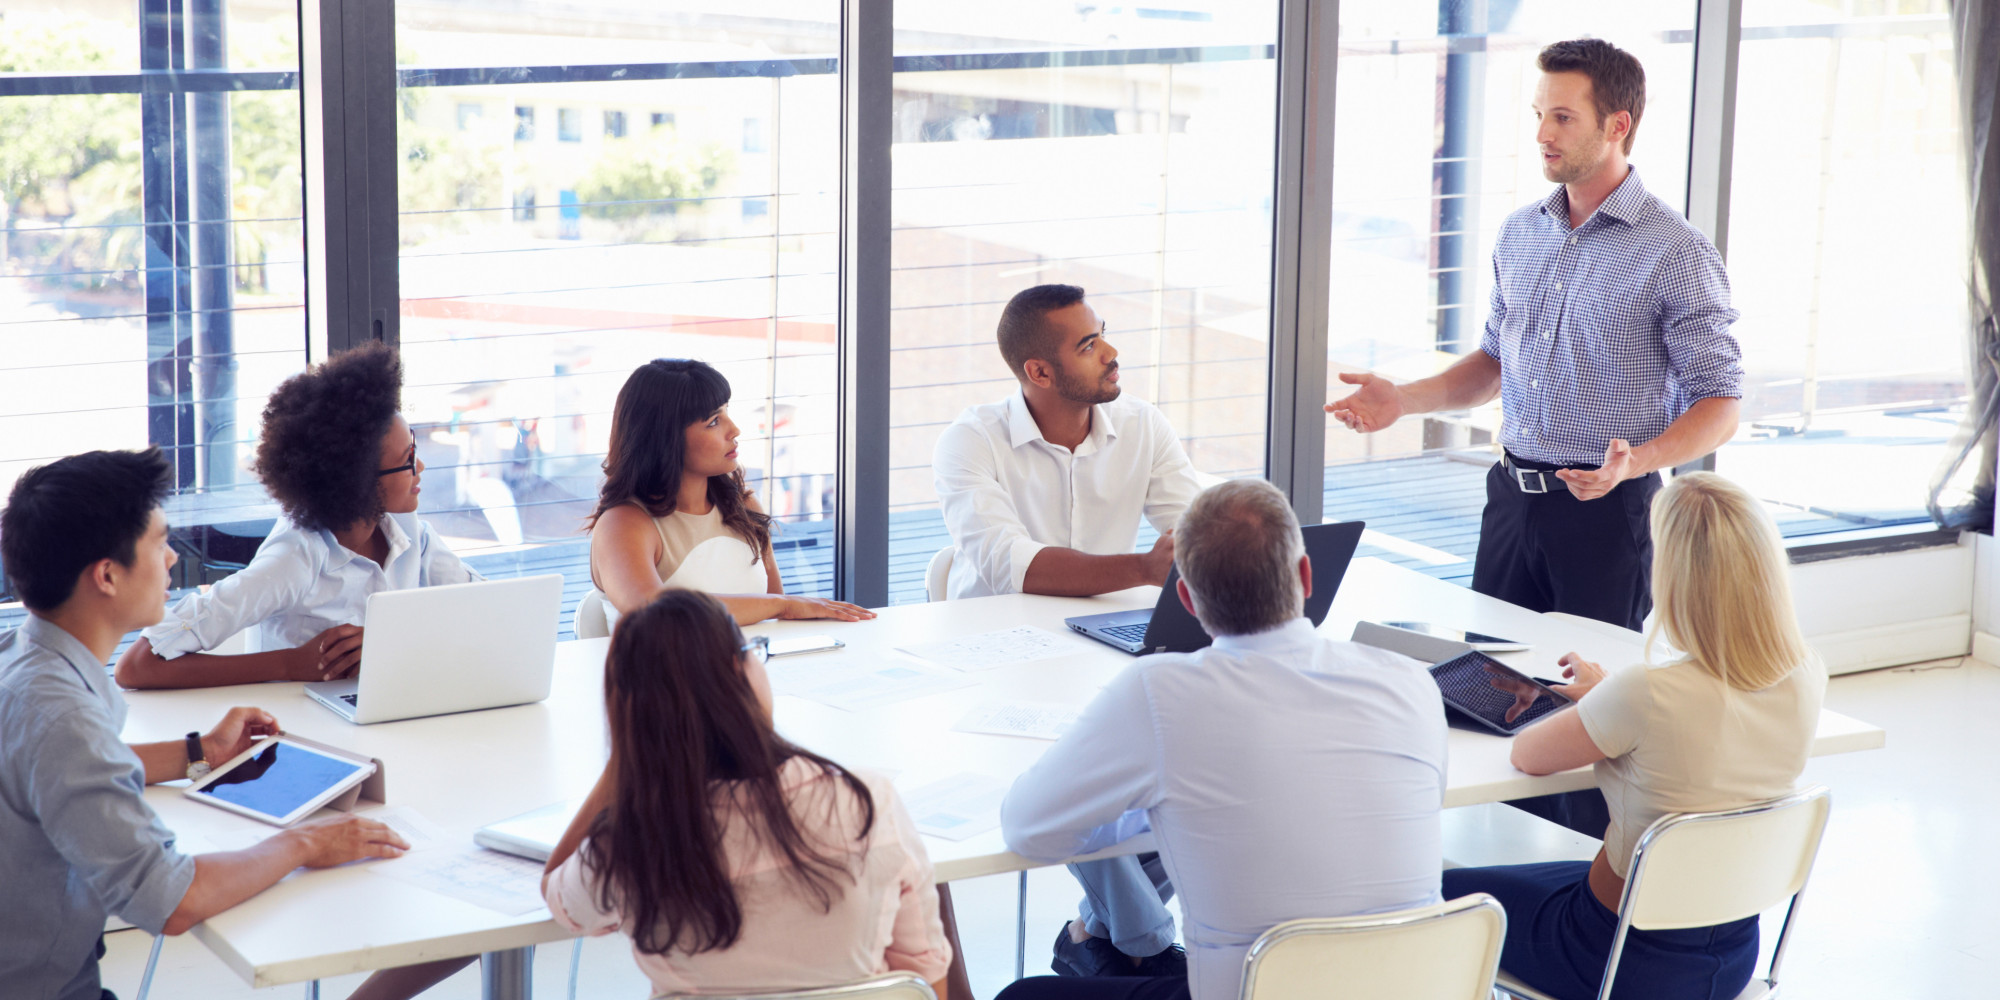 Some Proven Tips To Ensure Effective Business Meetings